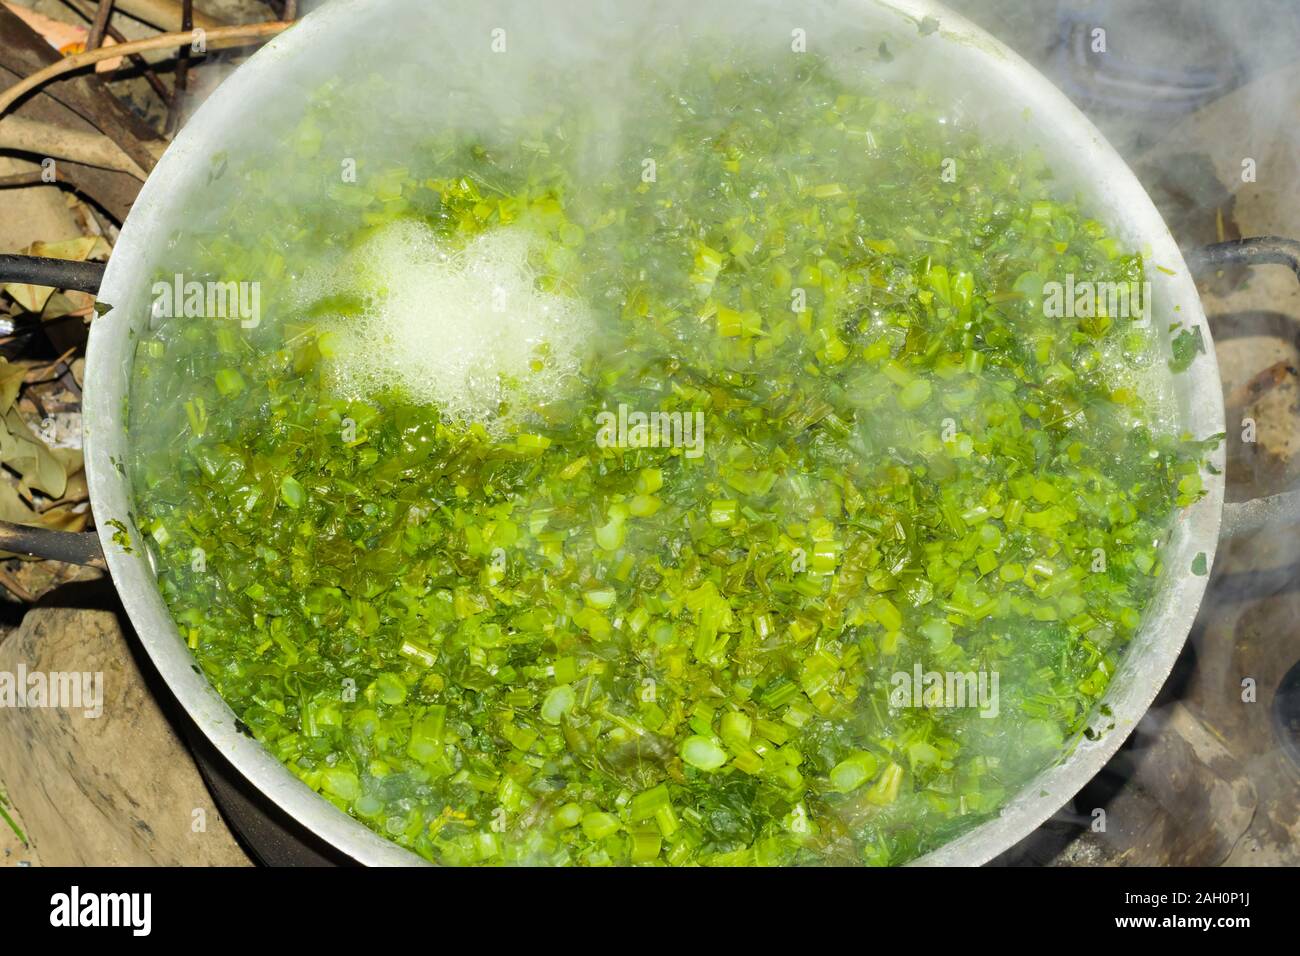 brassica leaves in boiling water,water bubbles are jumping out of the water.A local dish of india and Pakistan which is called saag sarsoon. Stock Photo